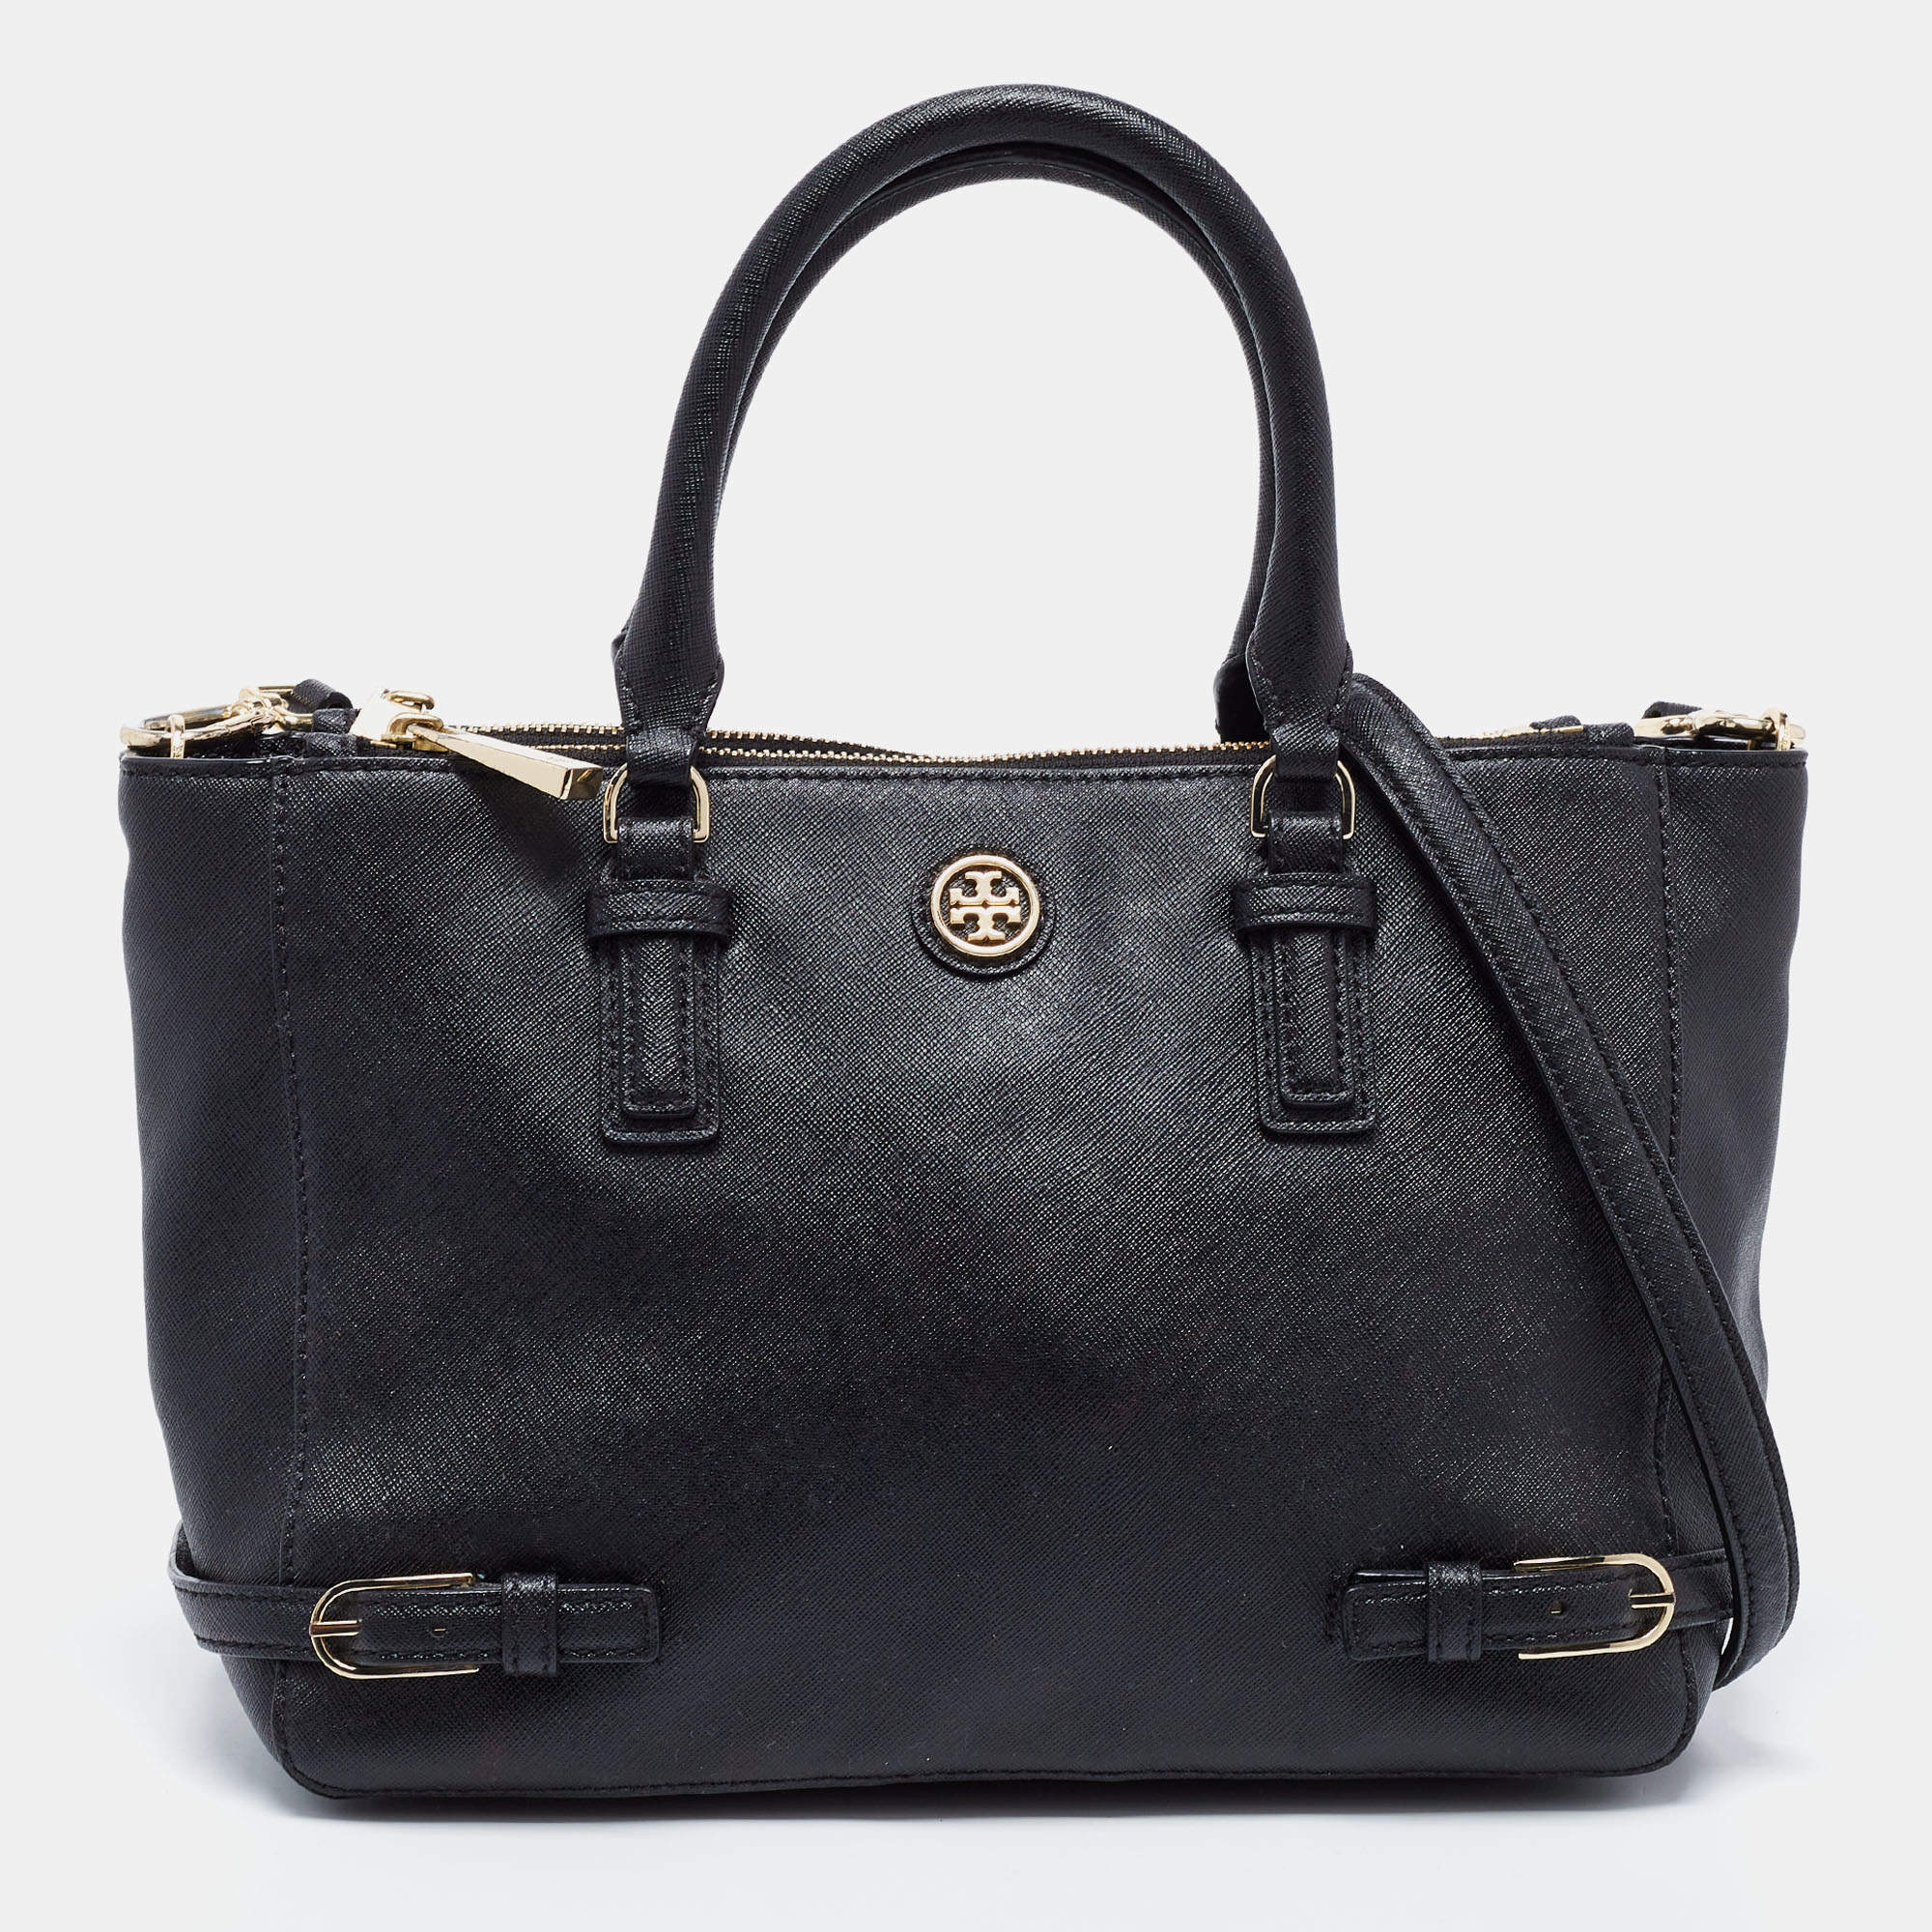 Tory Burch Black Leather Small Robinson Tote Tory Burch | The Luxury Closet